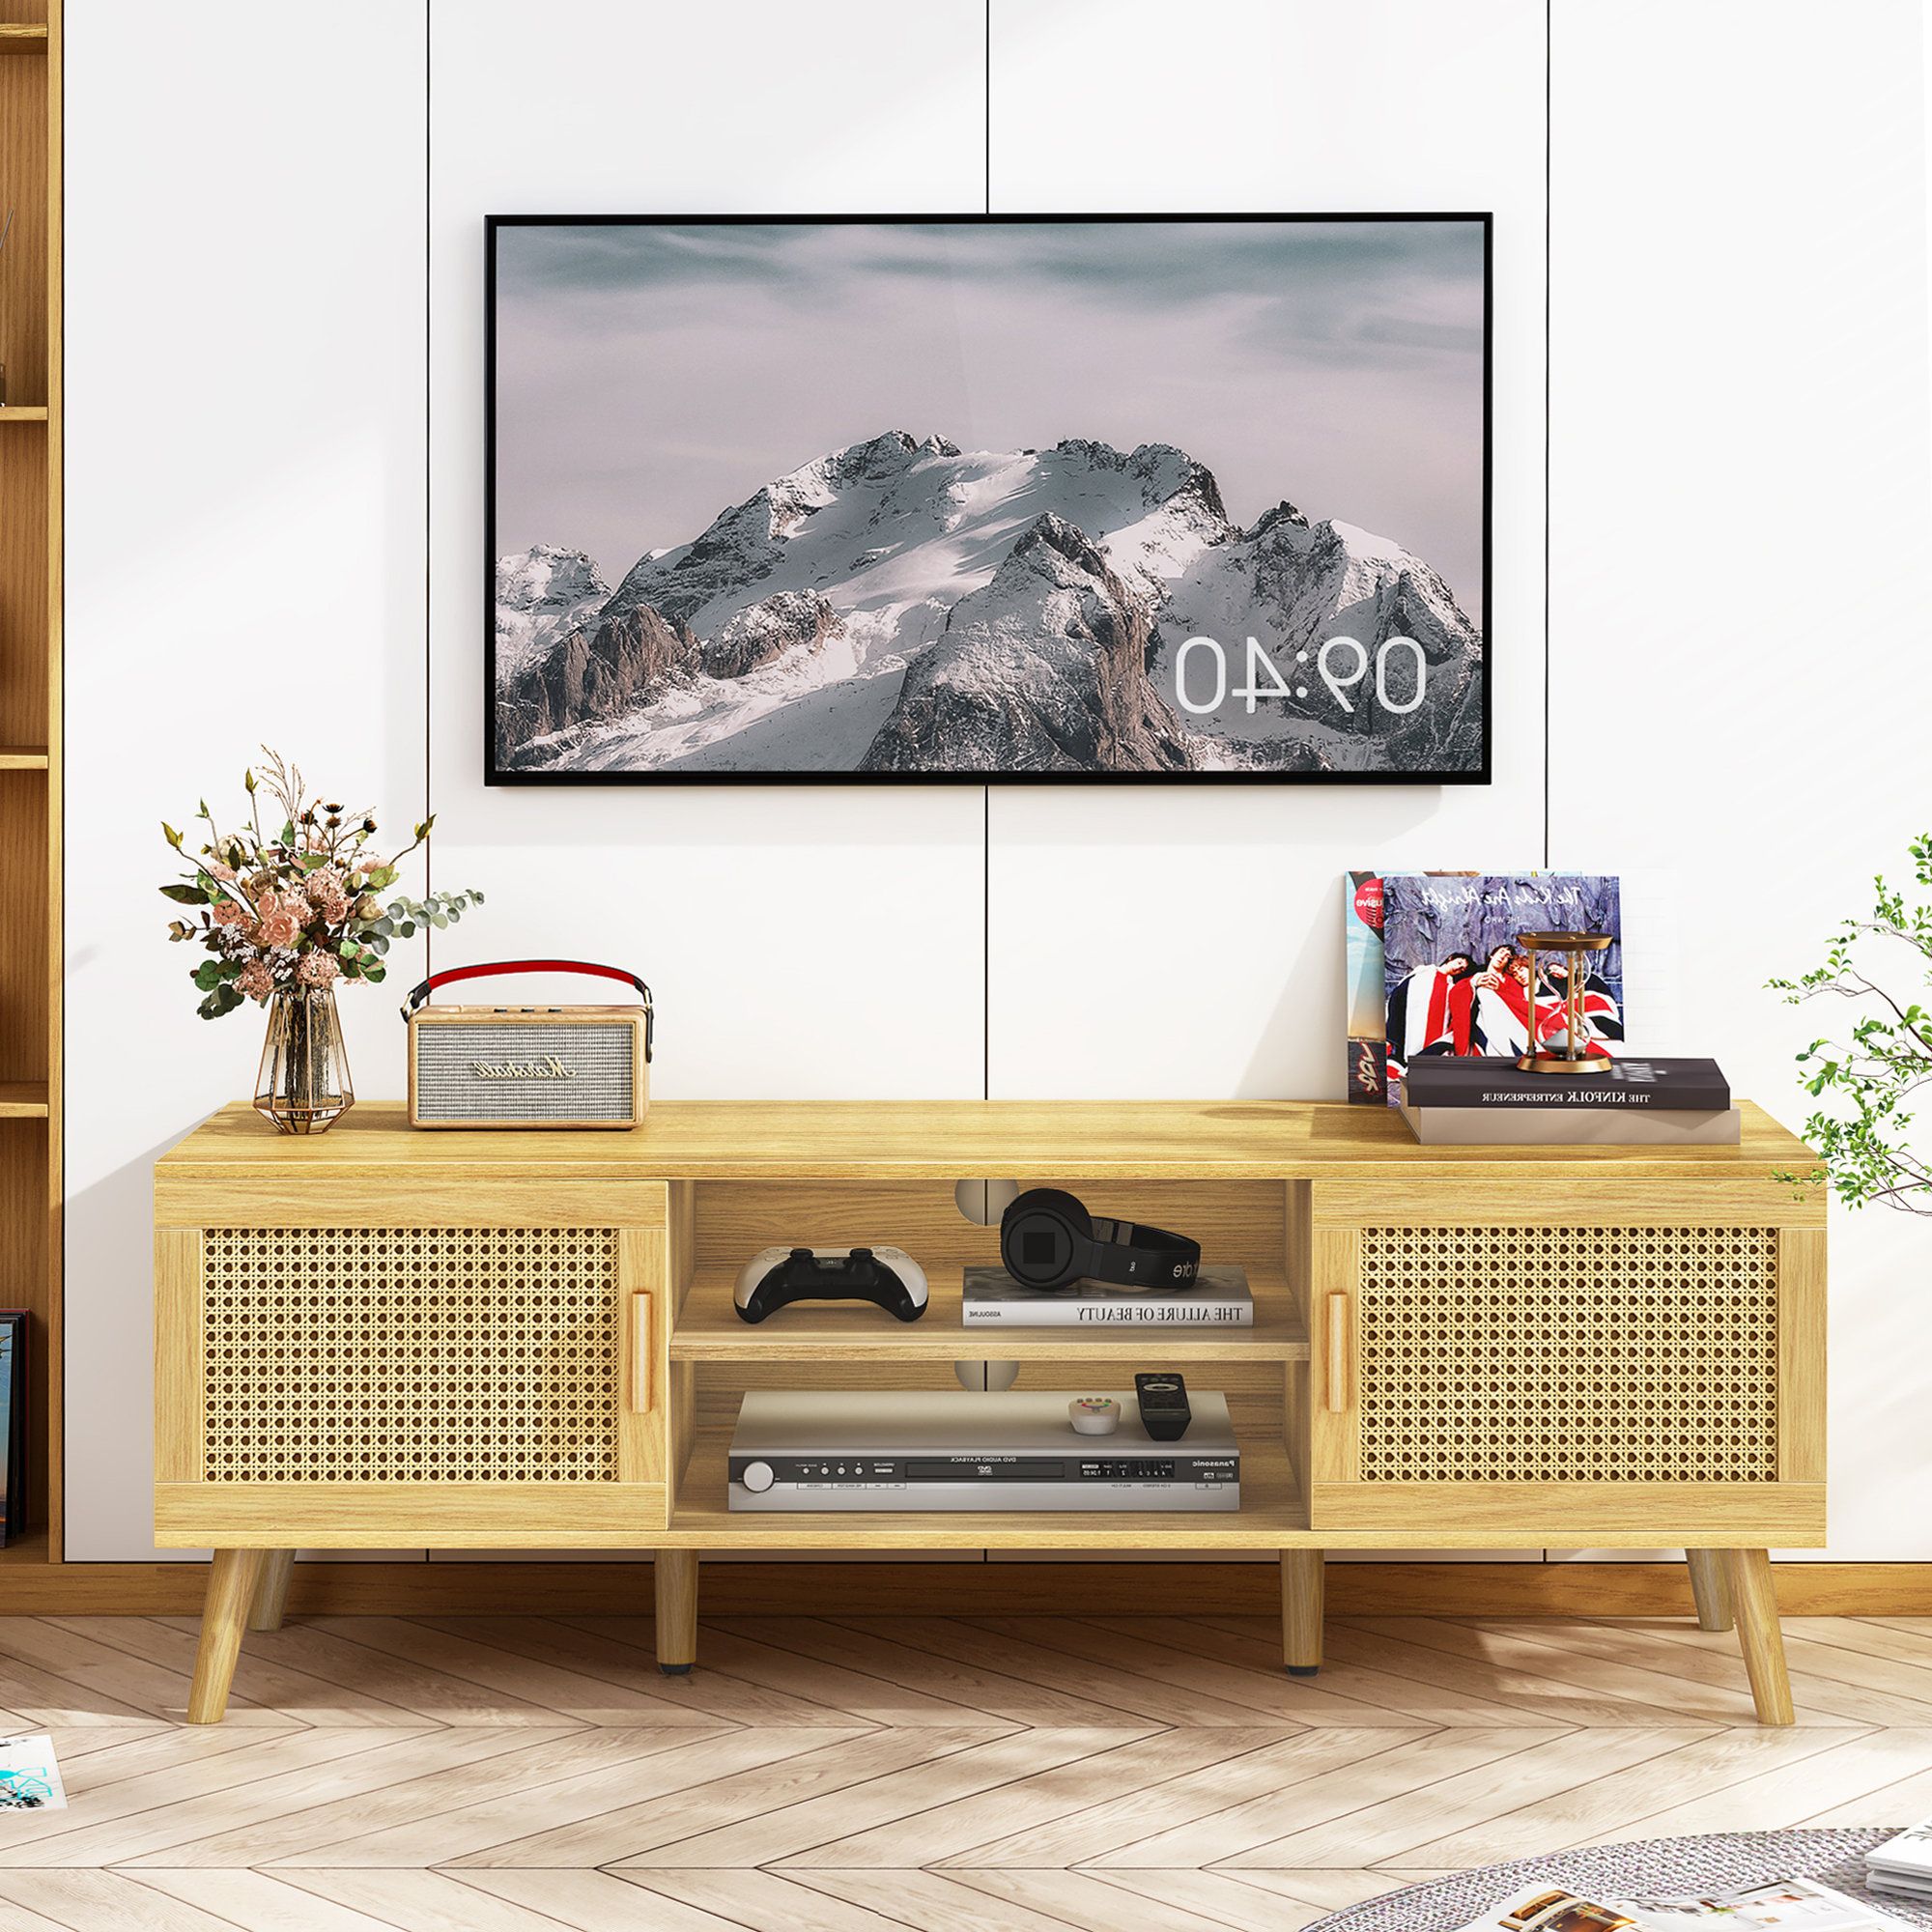 Bay Isle Home Tv Stand For 55 Inch Tv Entertainment Center Tv Console Table  With Adjustable Shelf And 2 Cabinets & Reviews | Wayfair Intended For Tier Stand Console Cabinets (Gallery 14 of 20)